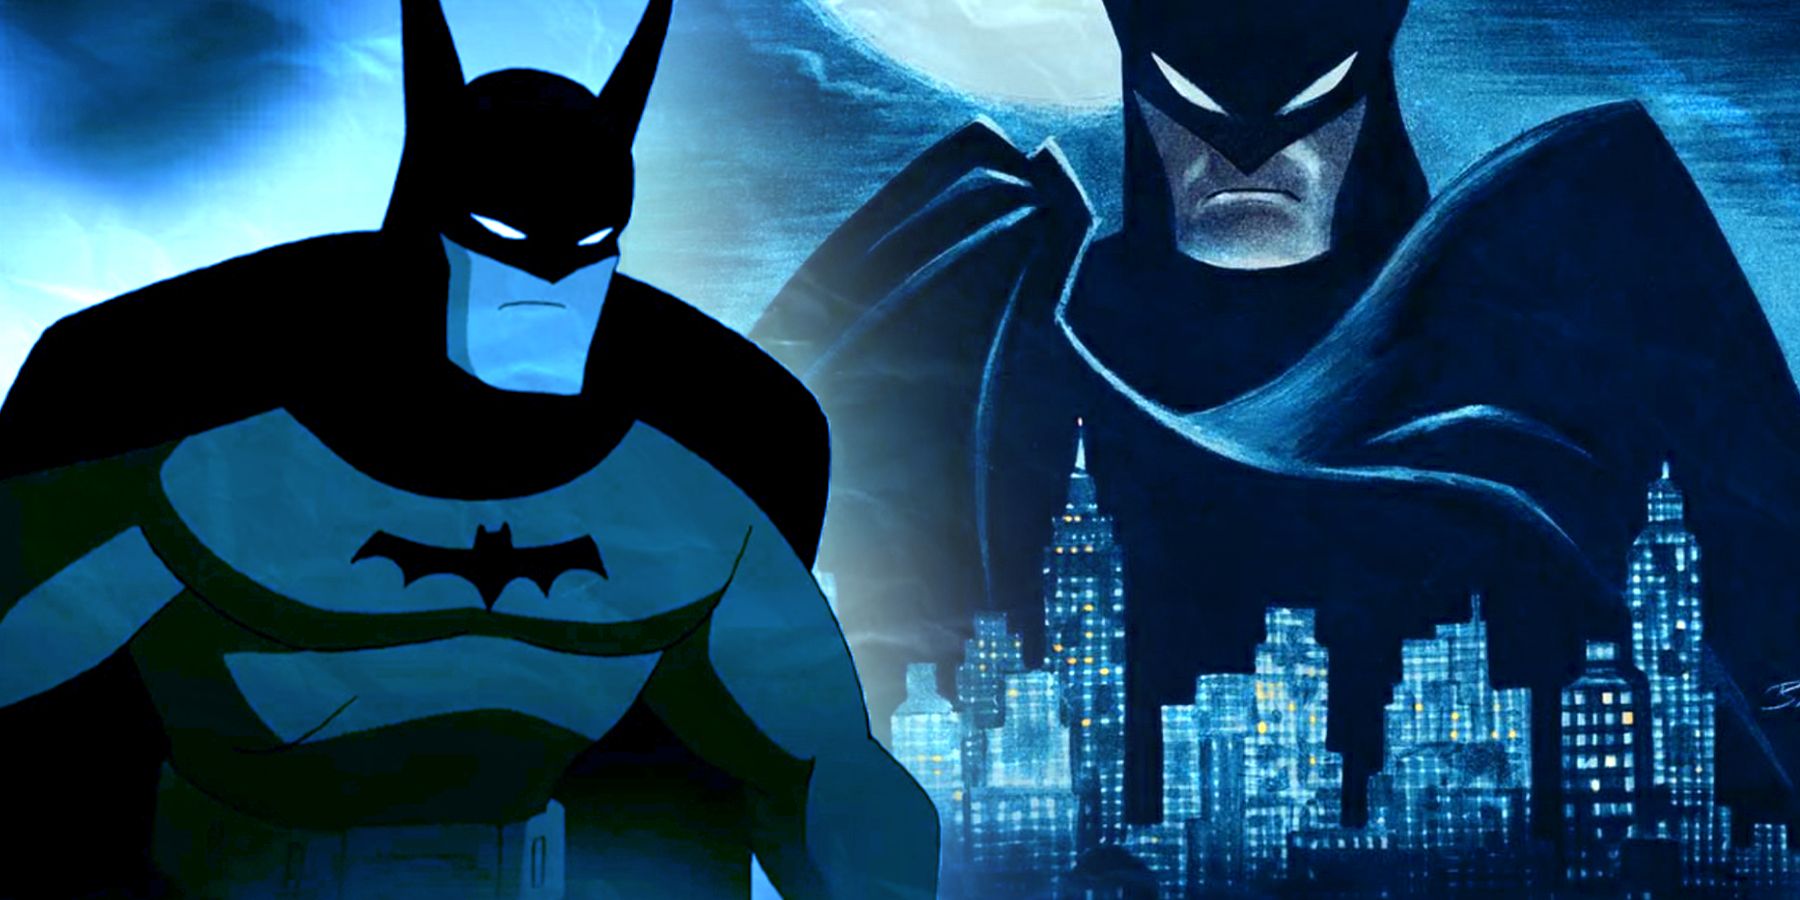 Batman as portrayed in the animated show 'Batman: Caped Crusader'.